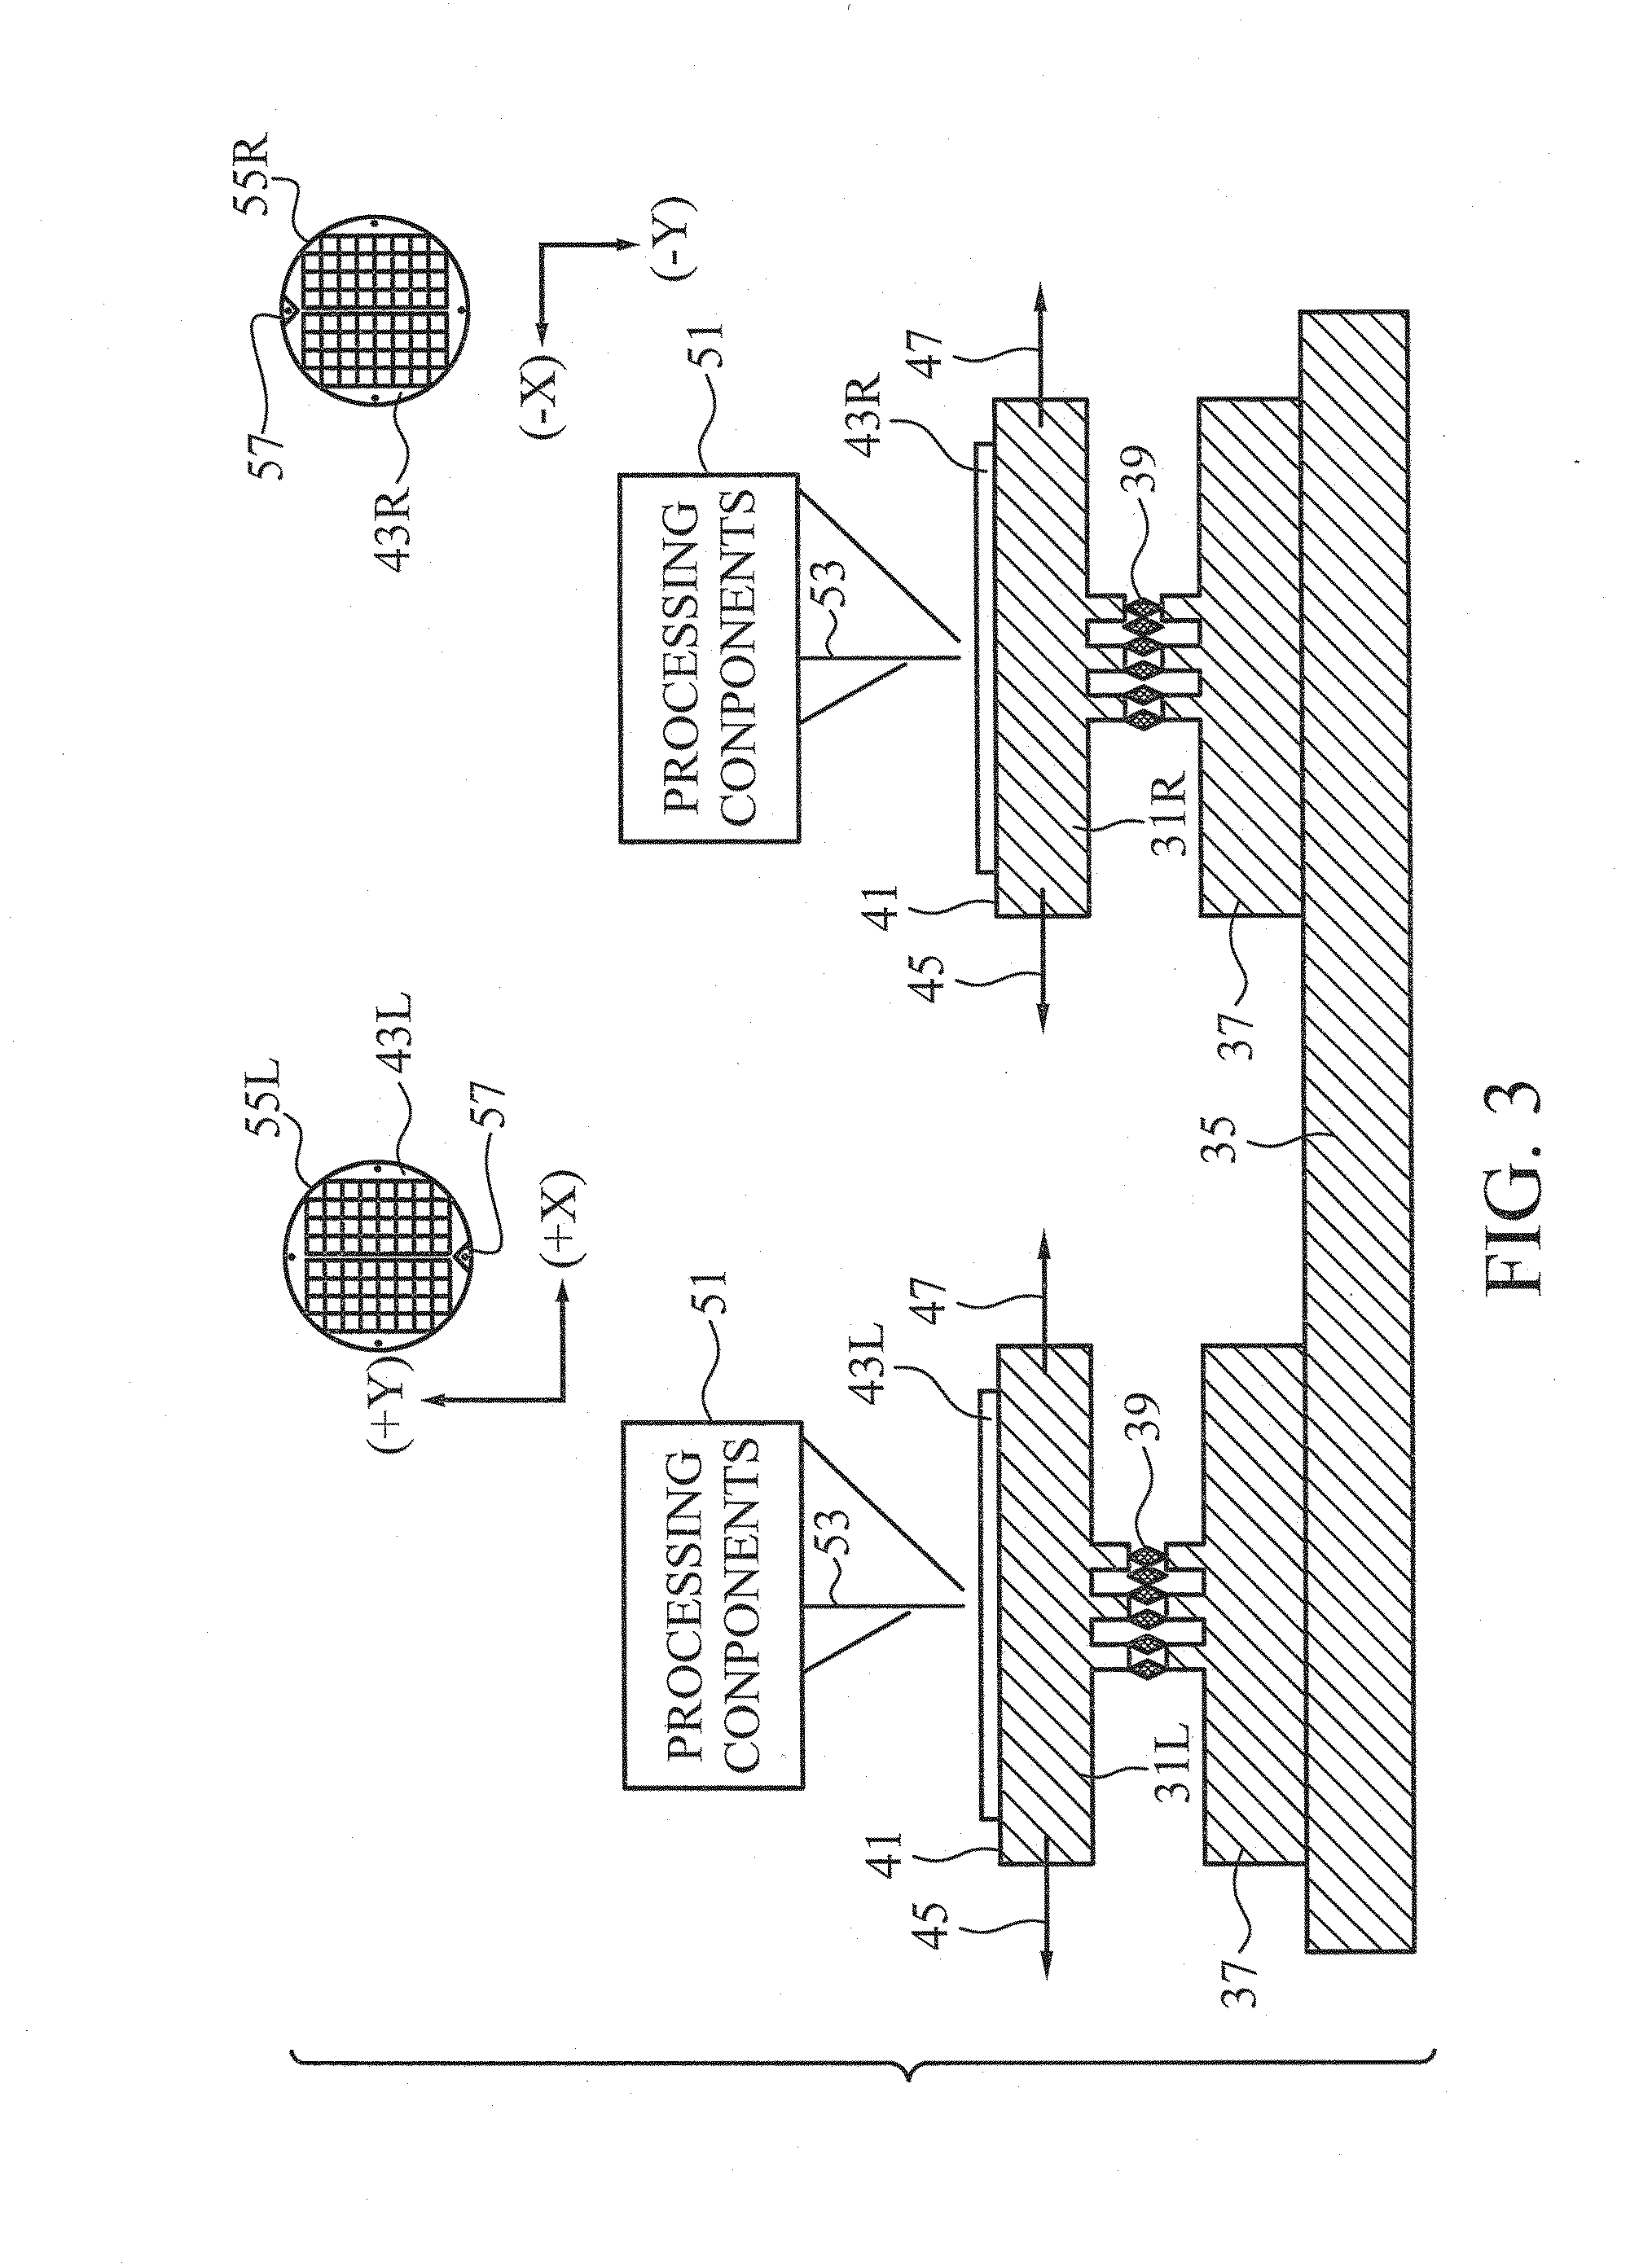 Semiconductor processing apparatus with simultaneously movable stages